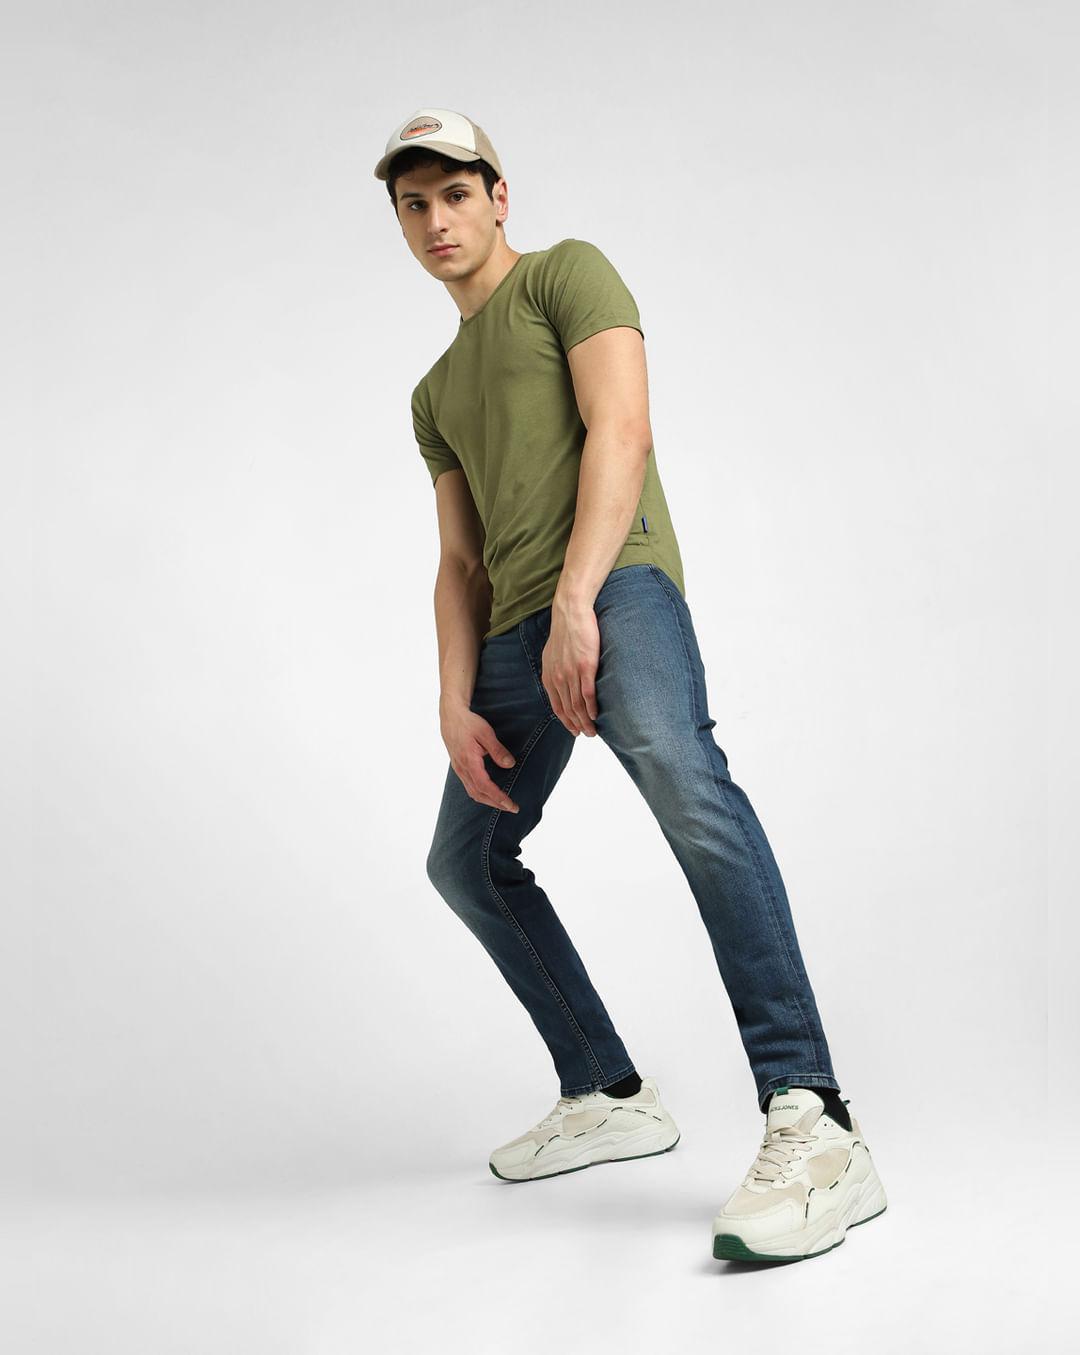 dark blue low rise washed slim fit jeans